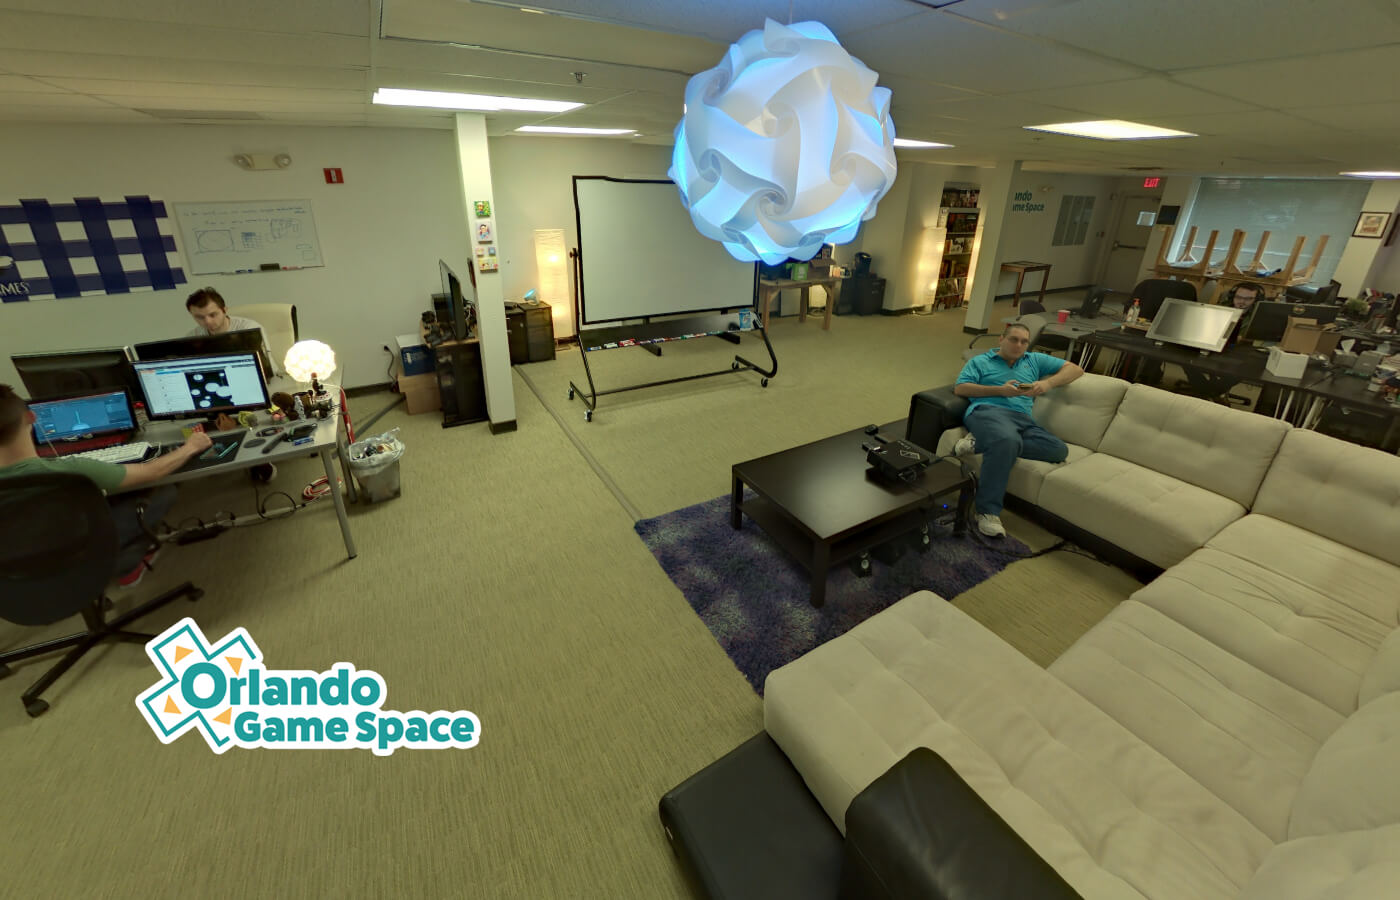 Game Space coworking space in Orlando